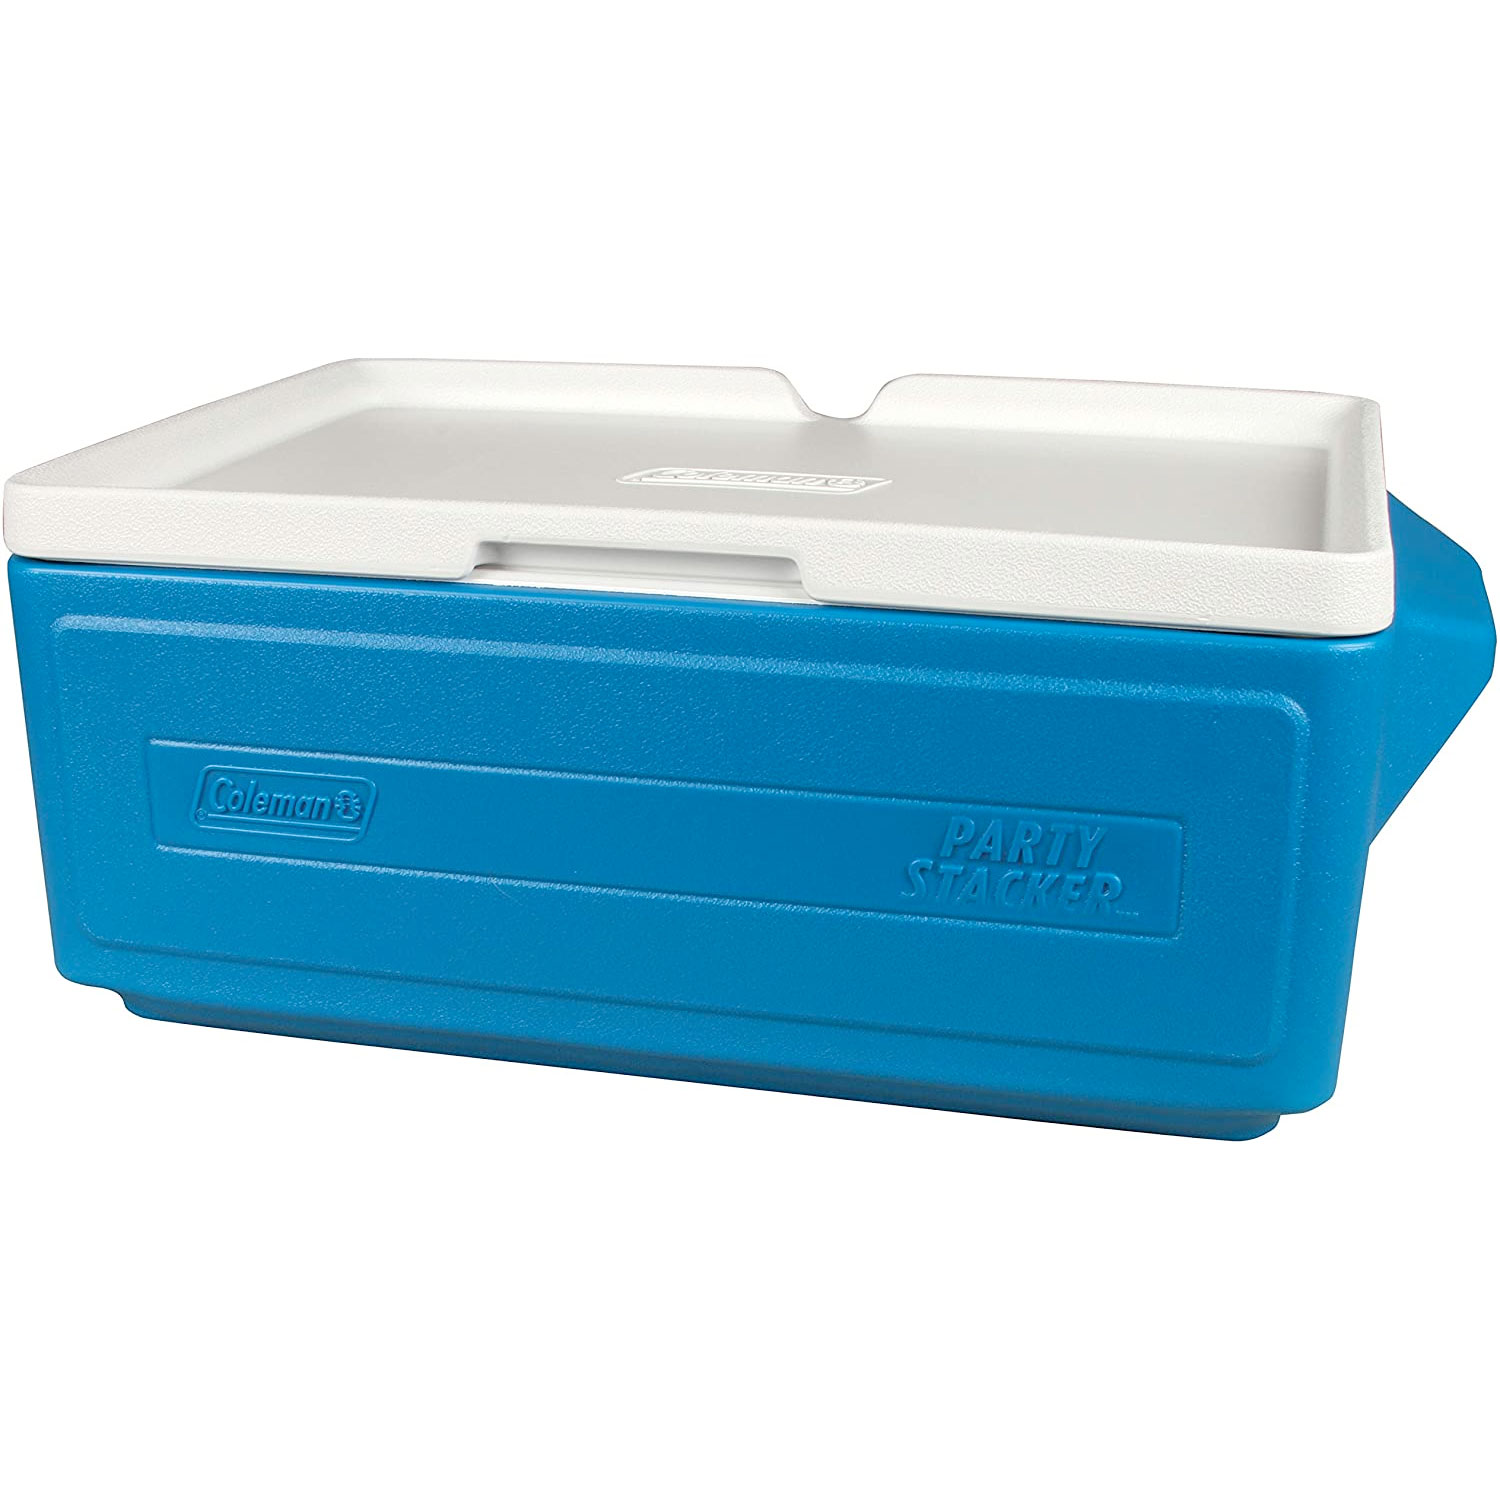 Amazon：Coleman 24-Can Party Stacker Portable Cooler只賣$24.99